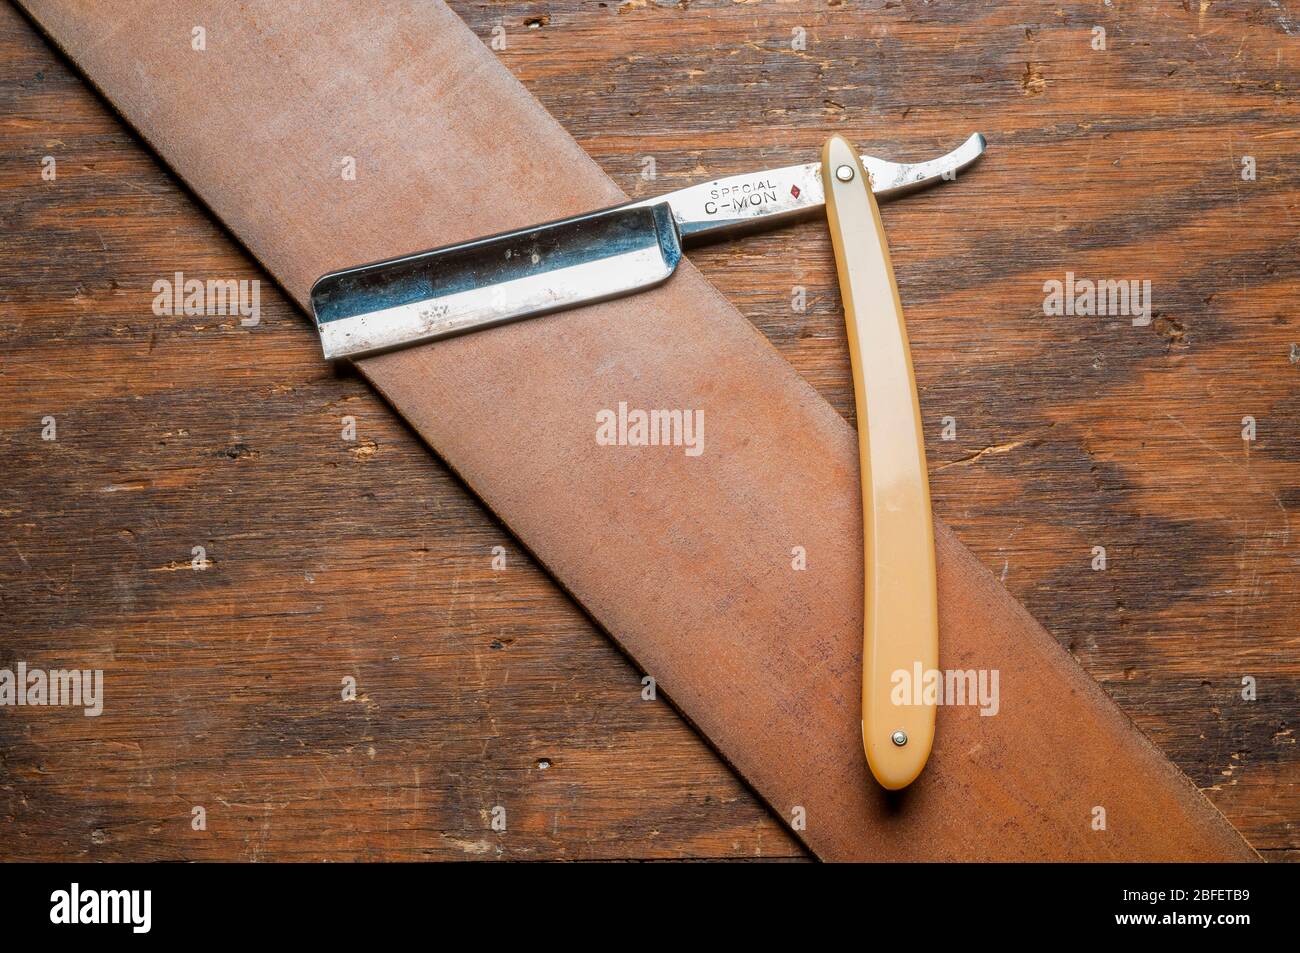 Premium Photo  Straight razor. vintage tools for barbers, razor, sharpen  the blade in leather brush, razor blades. man stropping straight razor with  leather tool.